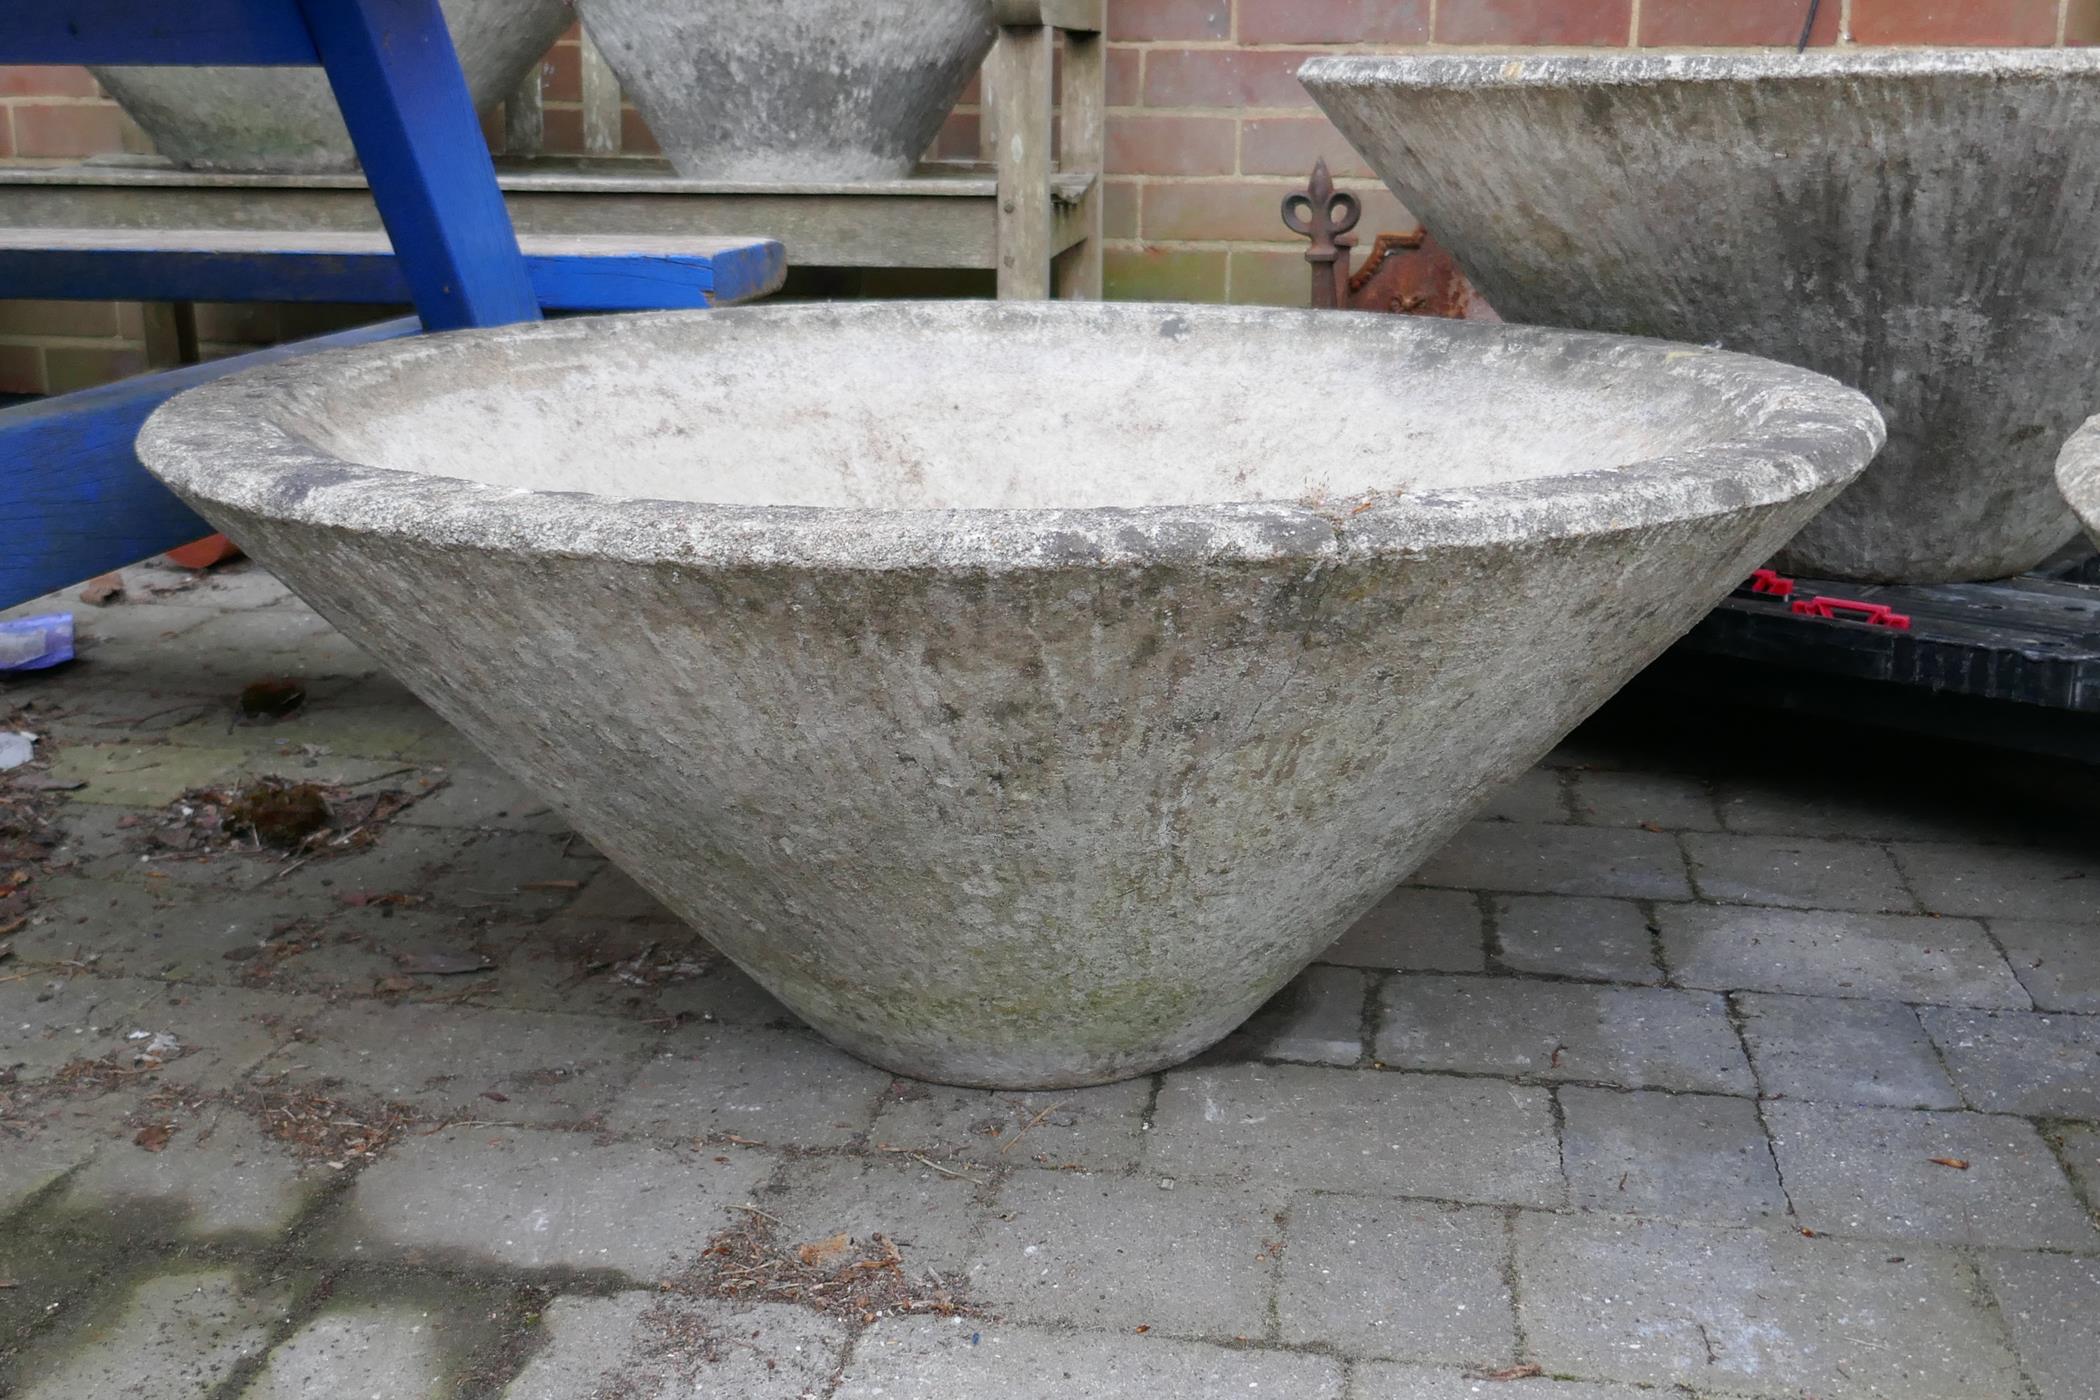 Three mid century conical concrete garden planters with bark effect exterior, 35" diameter - Image 3 of 6